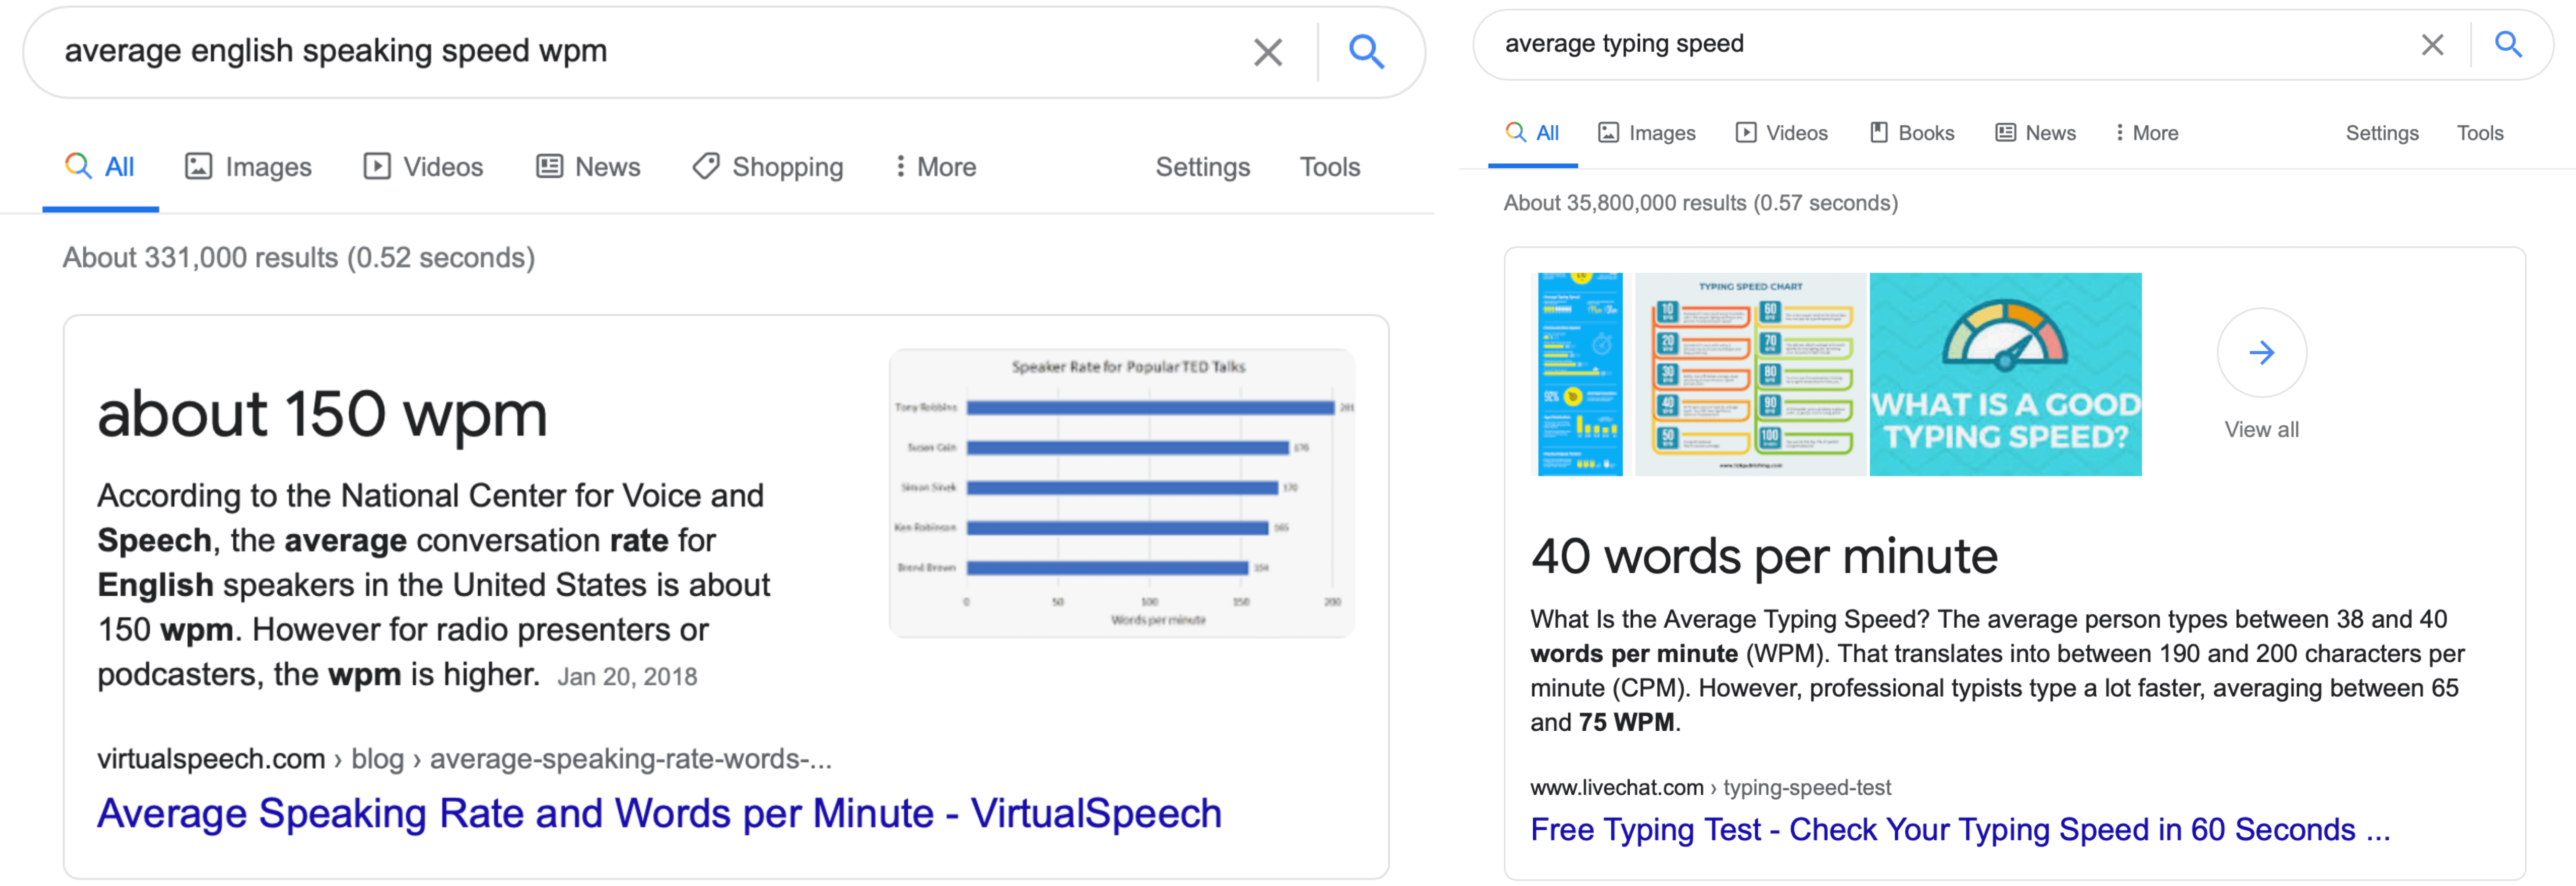 Speaking Speed Test - Test your speech rate in a minute (WPM)